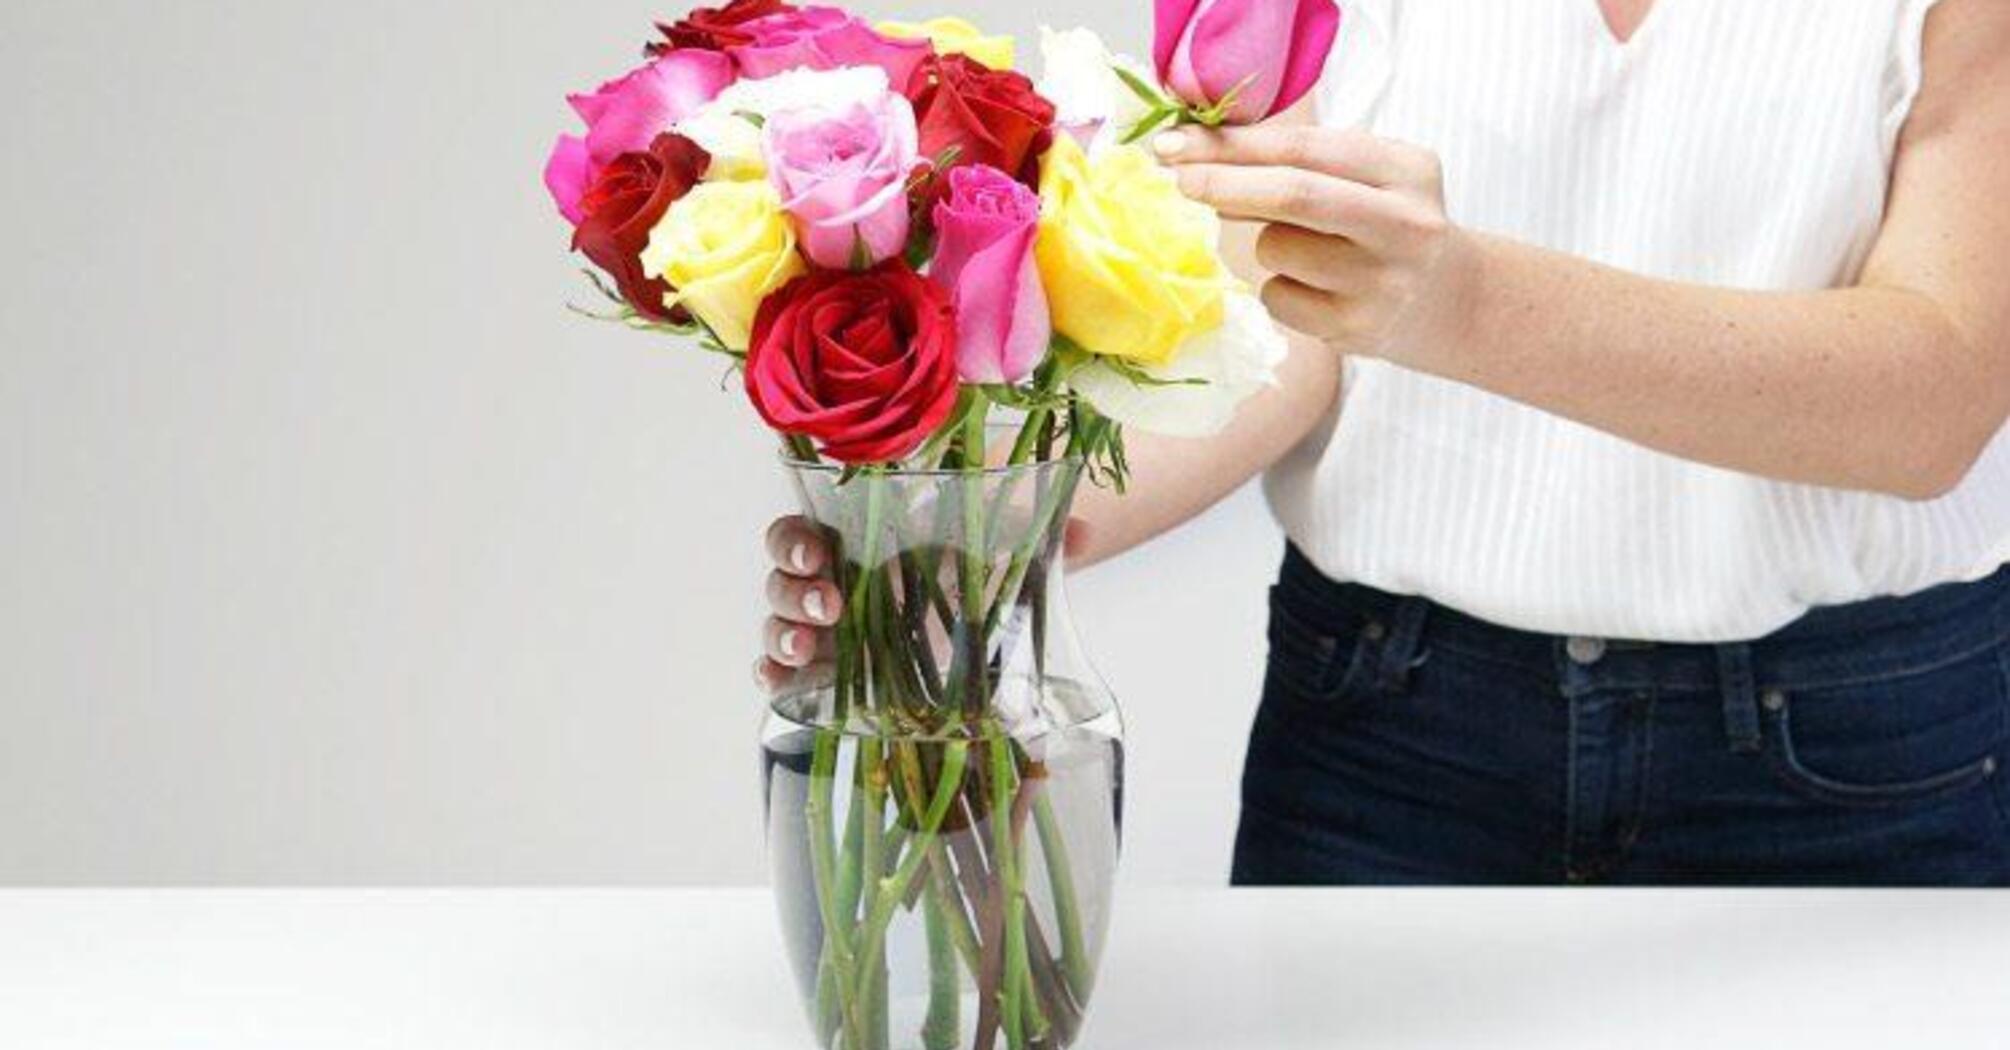 What to add to the vase to make the flowers last longer